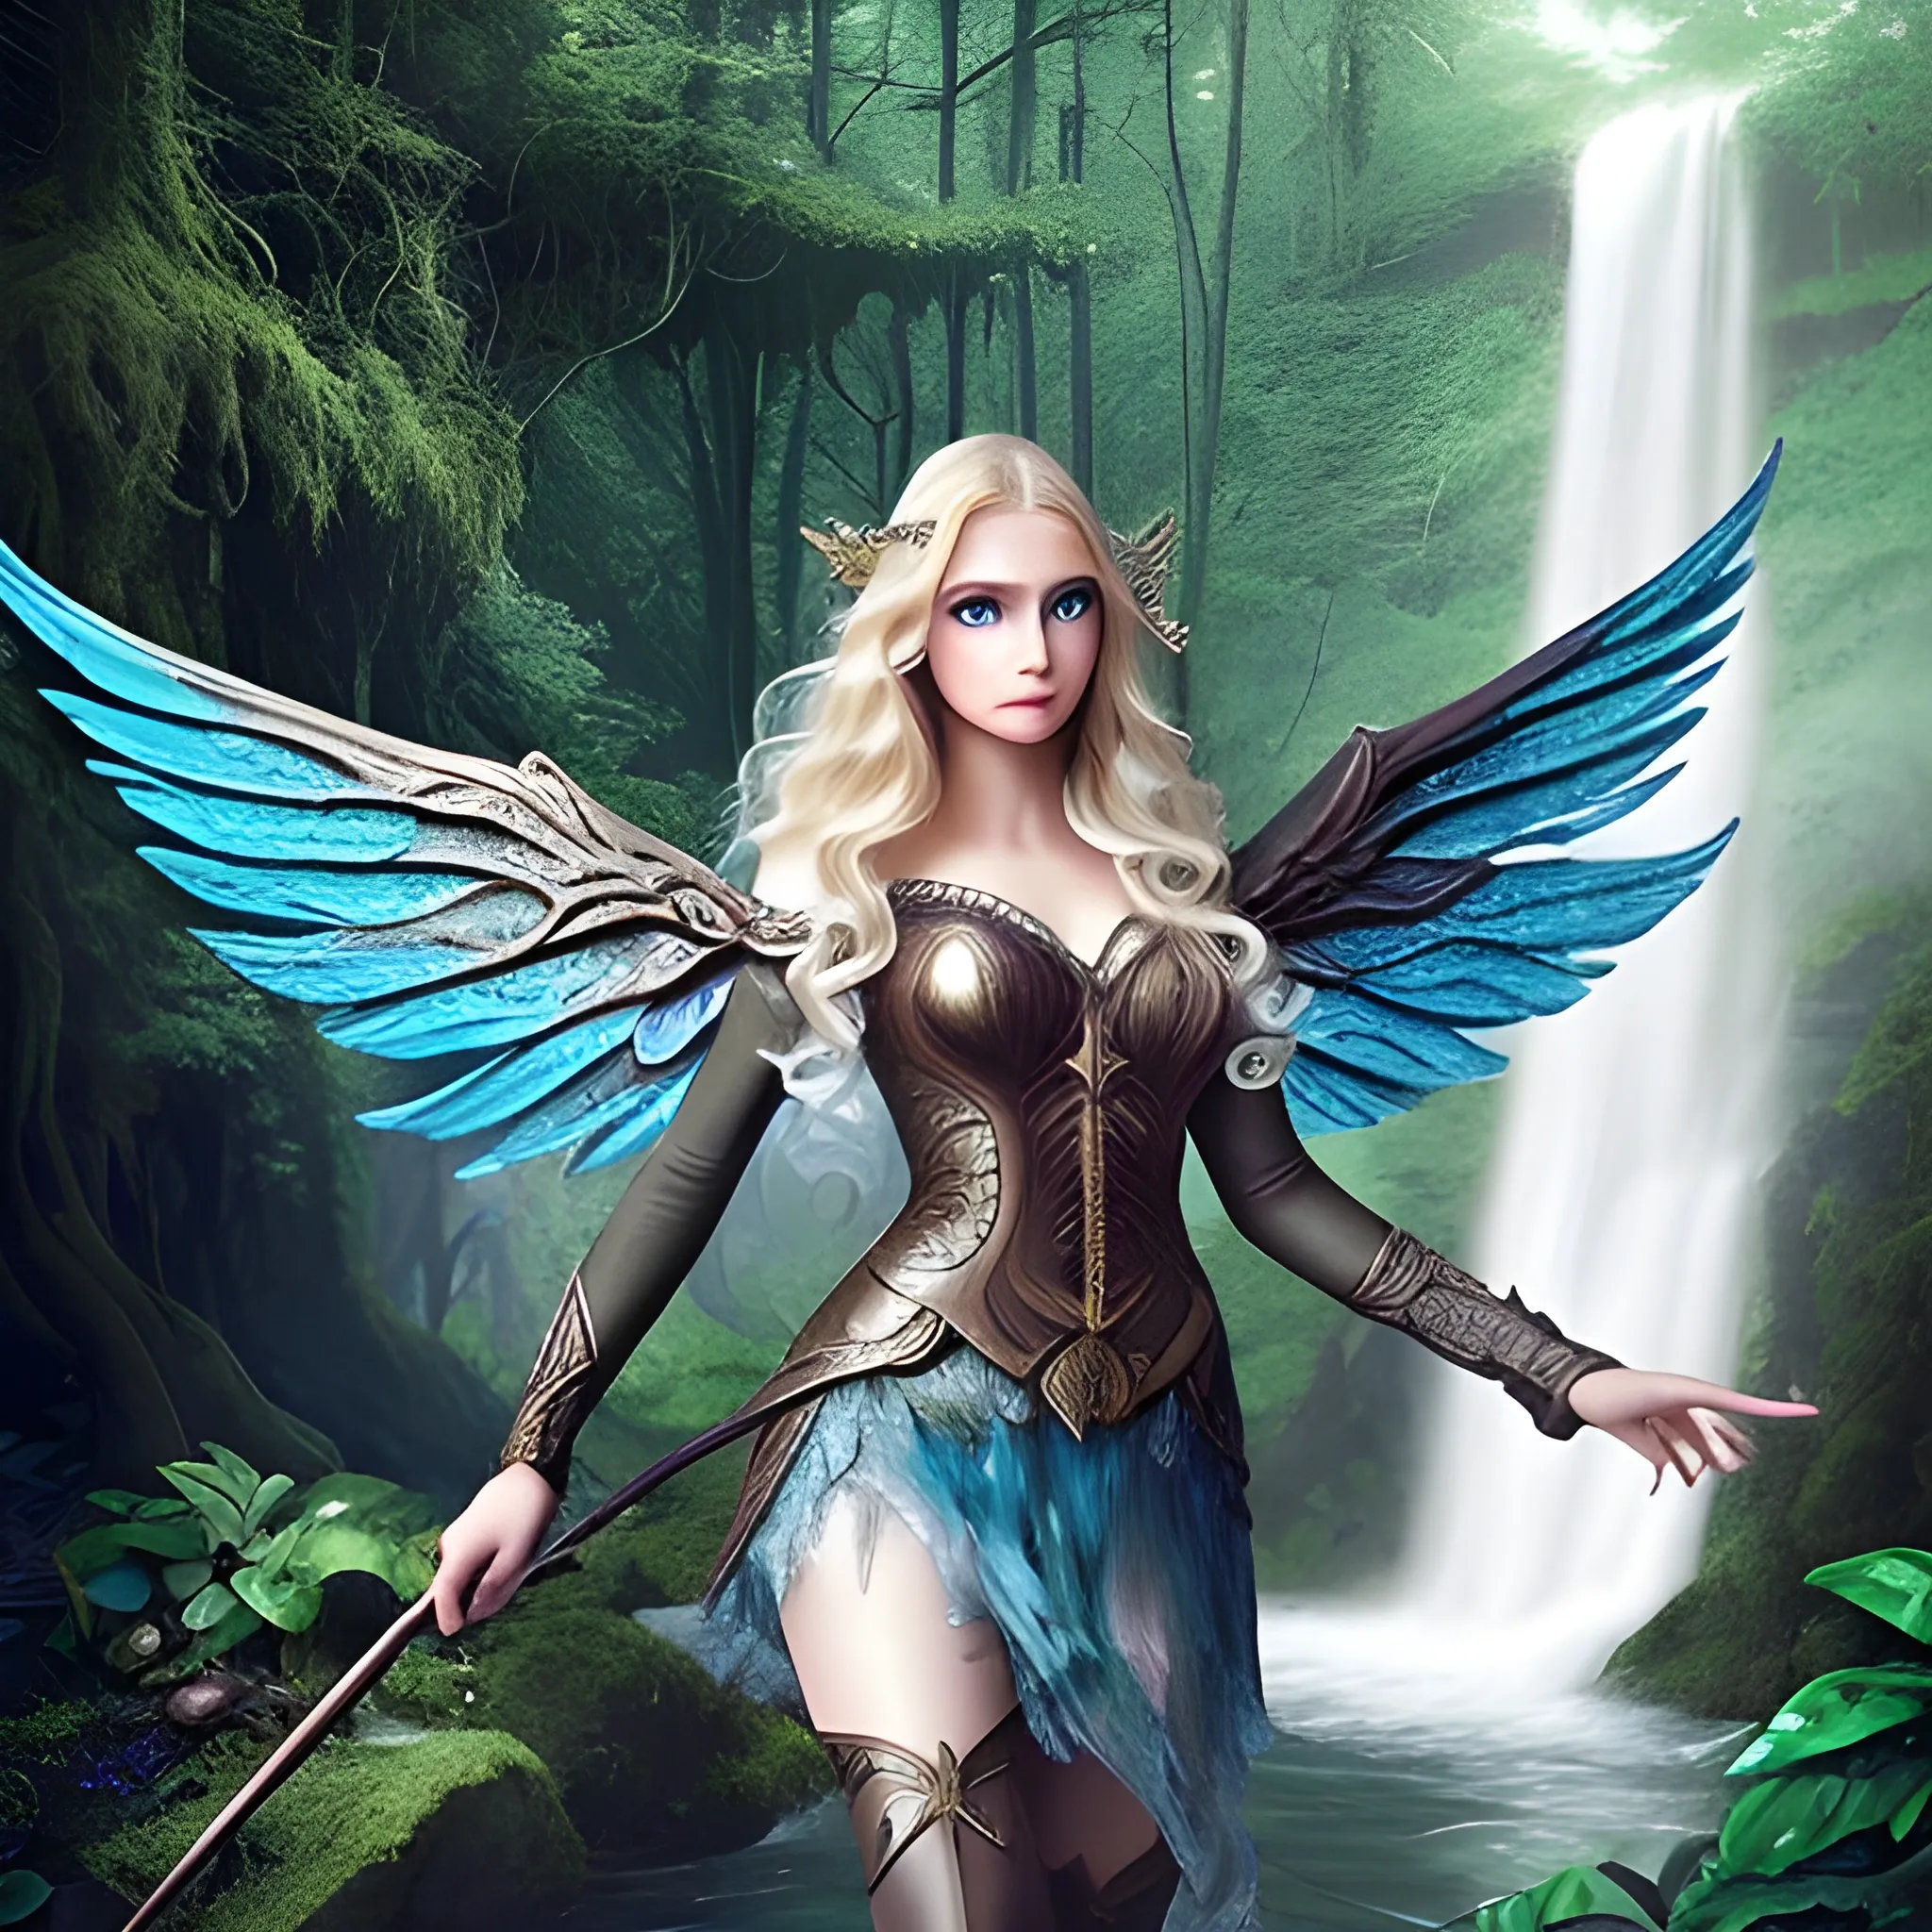 elf, perfect face, blue eyes, lips, wavy hair, strong legs, wings, tall stature, fantasy, waterfall in the perfect forest, realistic